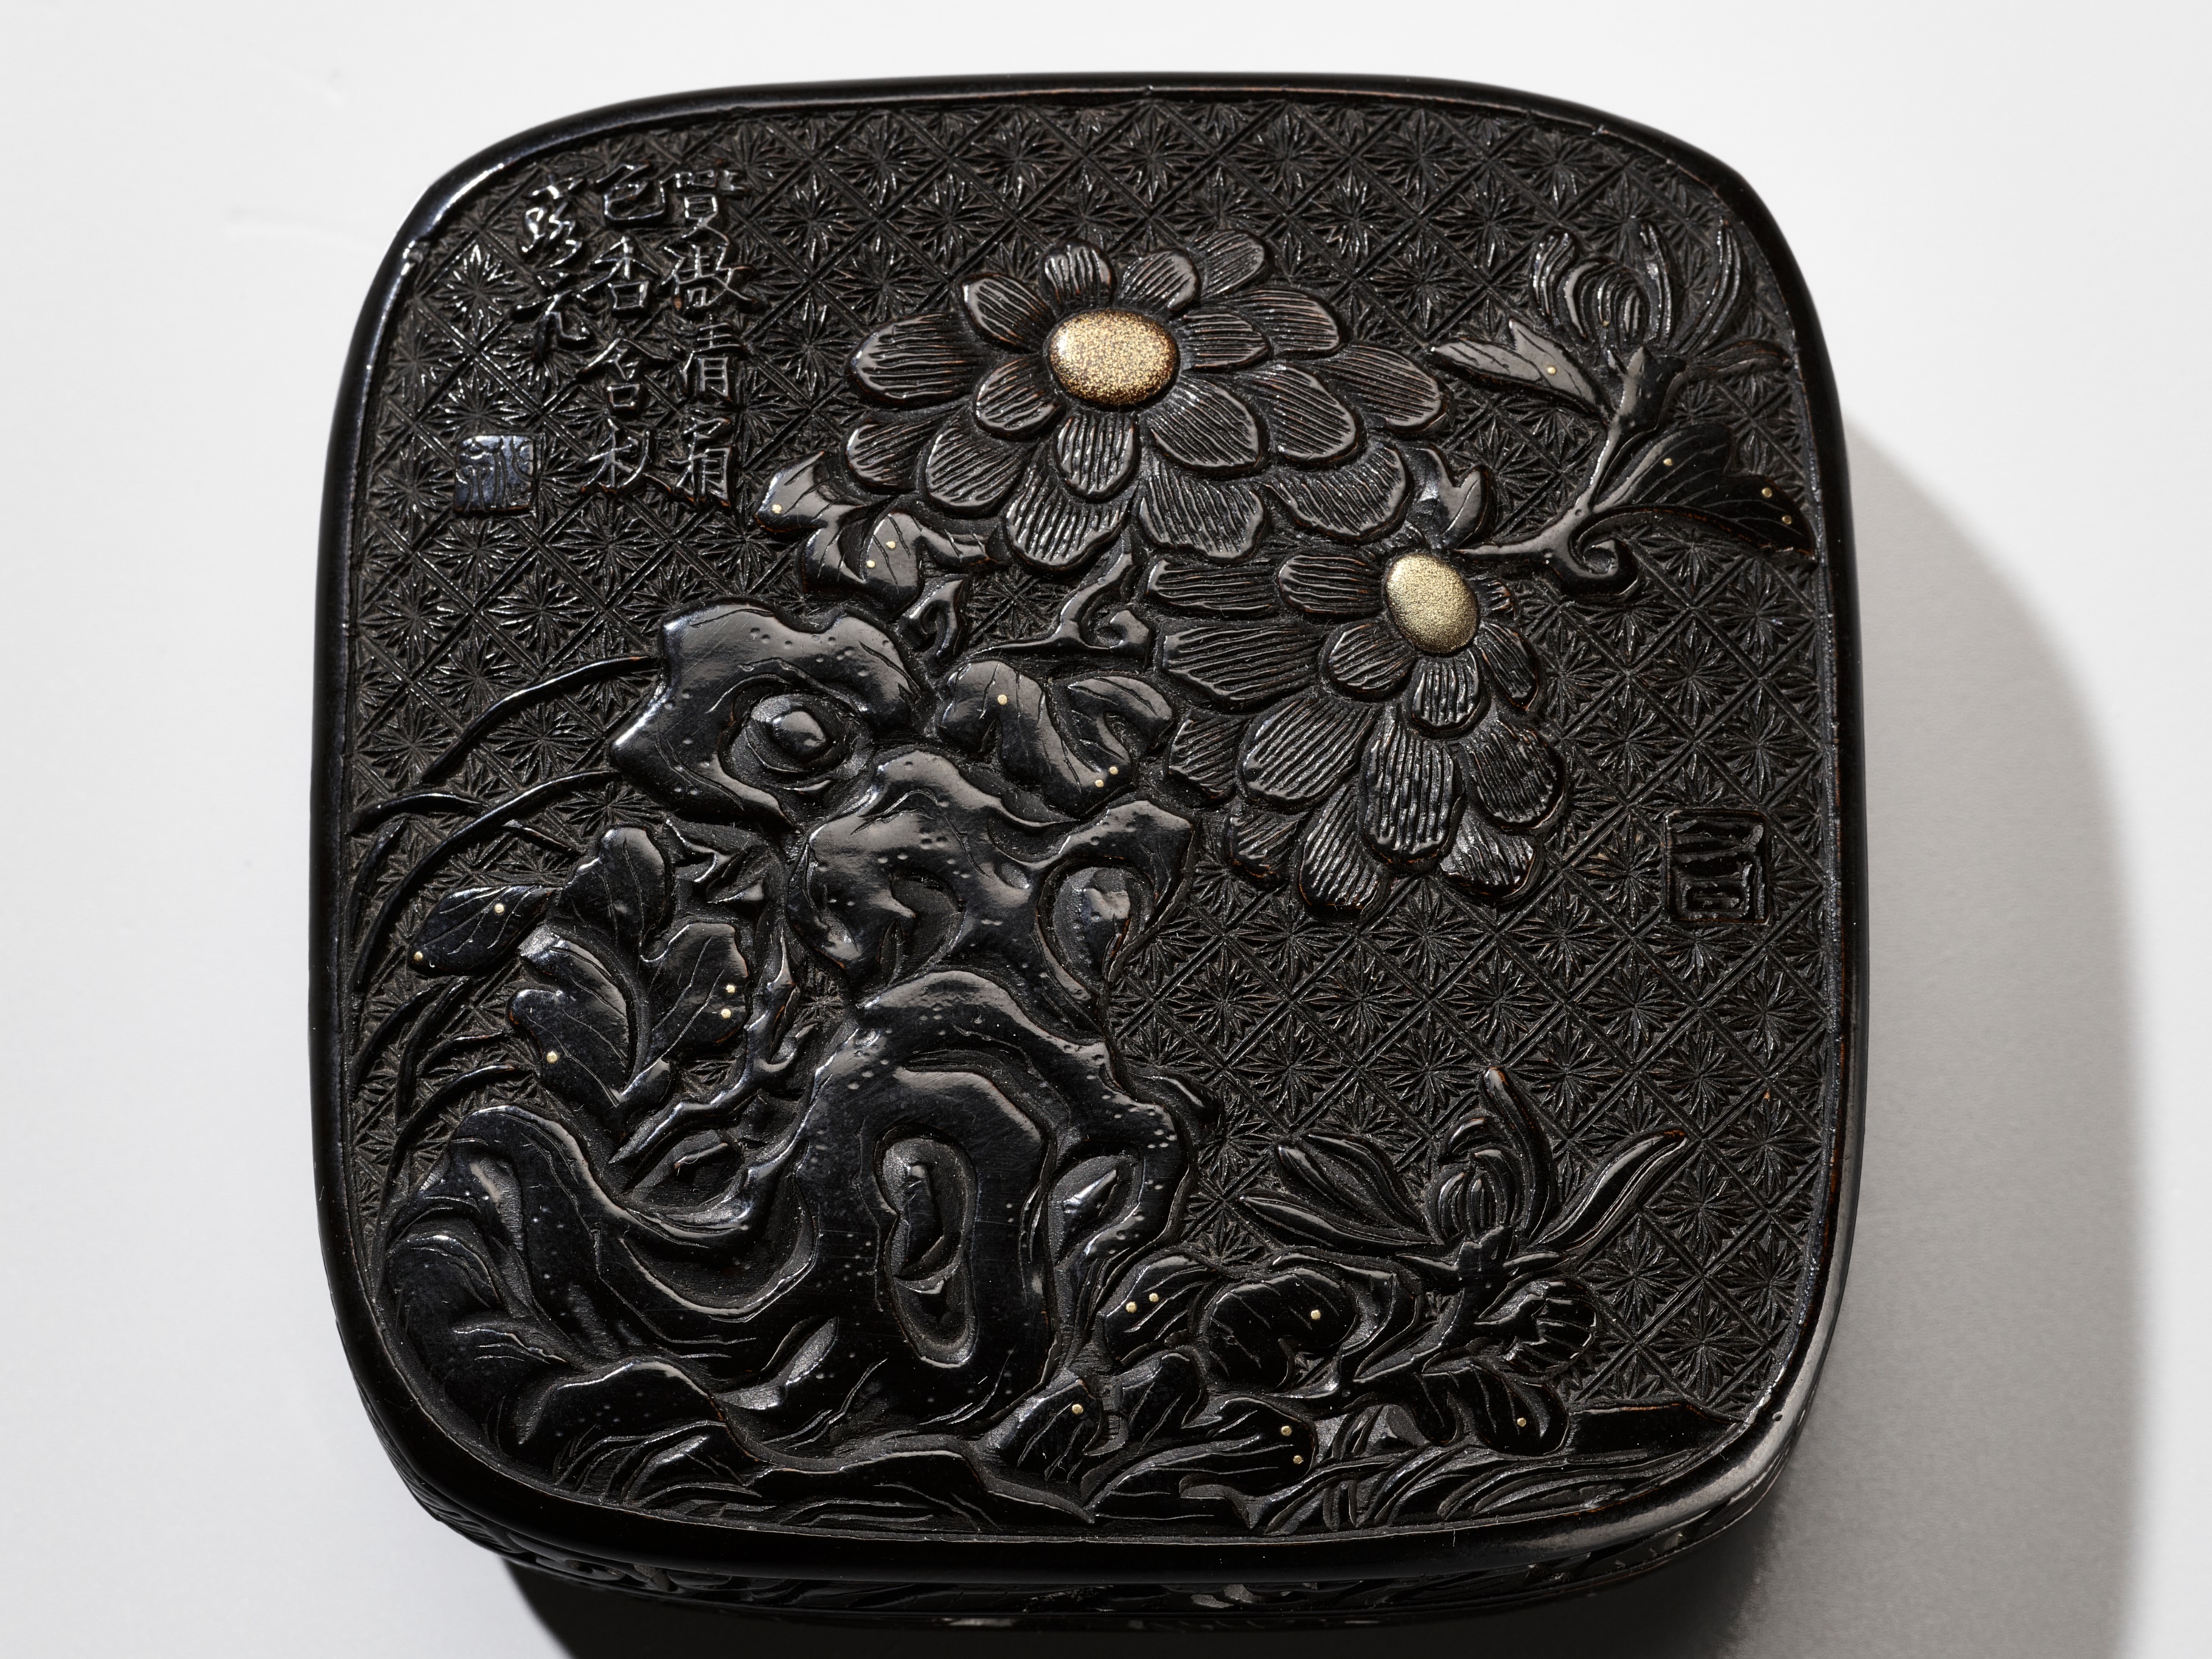 A RARE TSUIKOKU (CARVED BLACK LACQUER) KOGO (INCENSE BOX) AND COVER WITH CHRYSANTHEMUMS AND POEM - Image 8 of 10